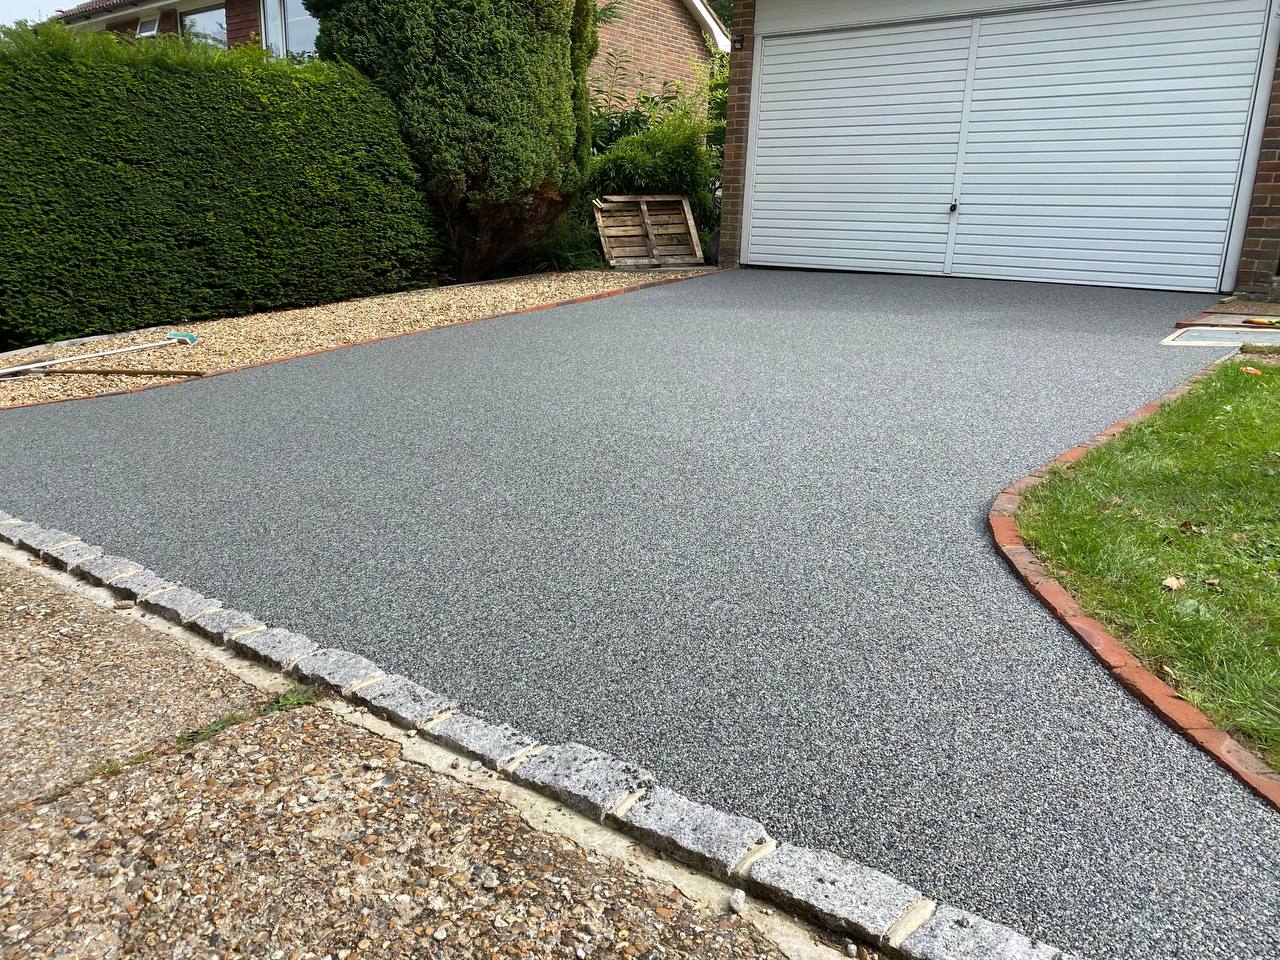 This is a photo of a new resin bound driveway carried out in Huddersfield. All works done by Resin Driveways Huddersfield